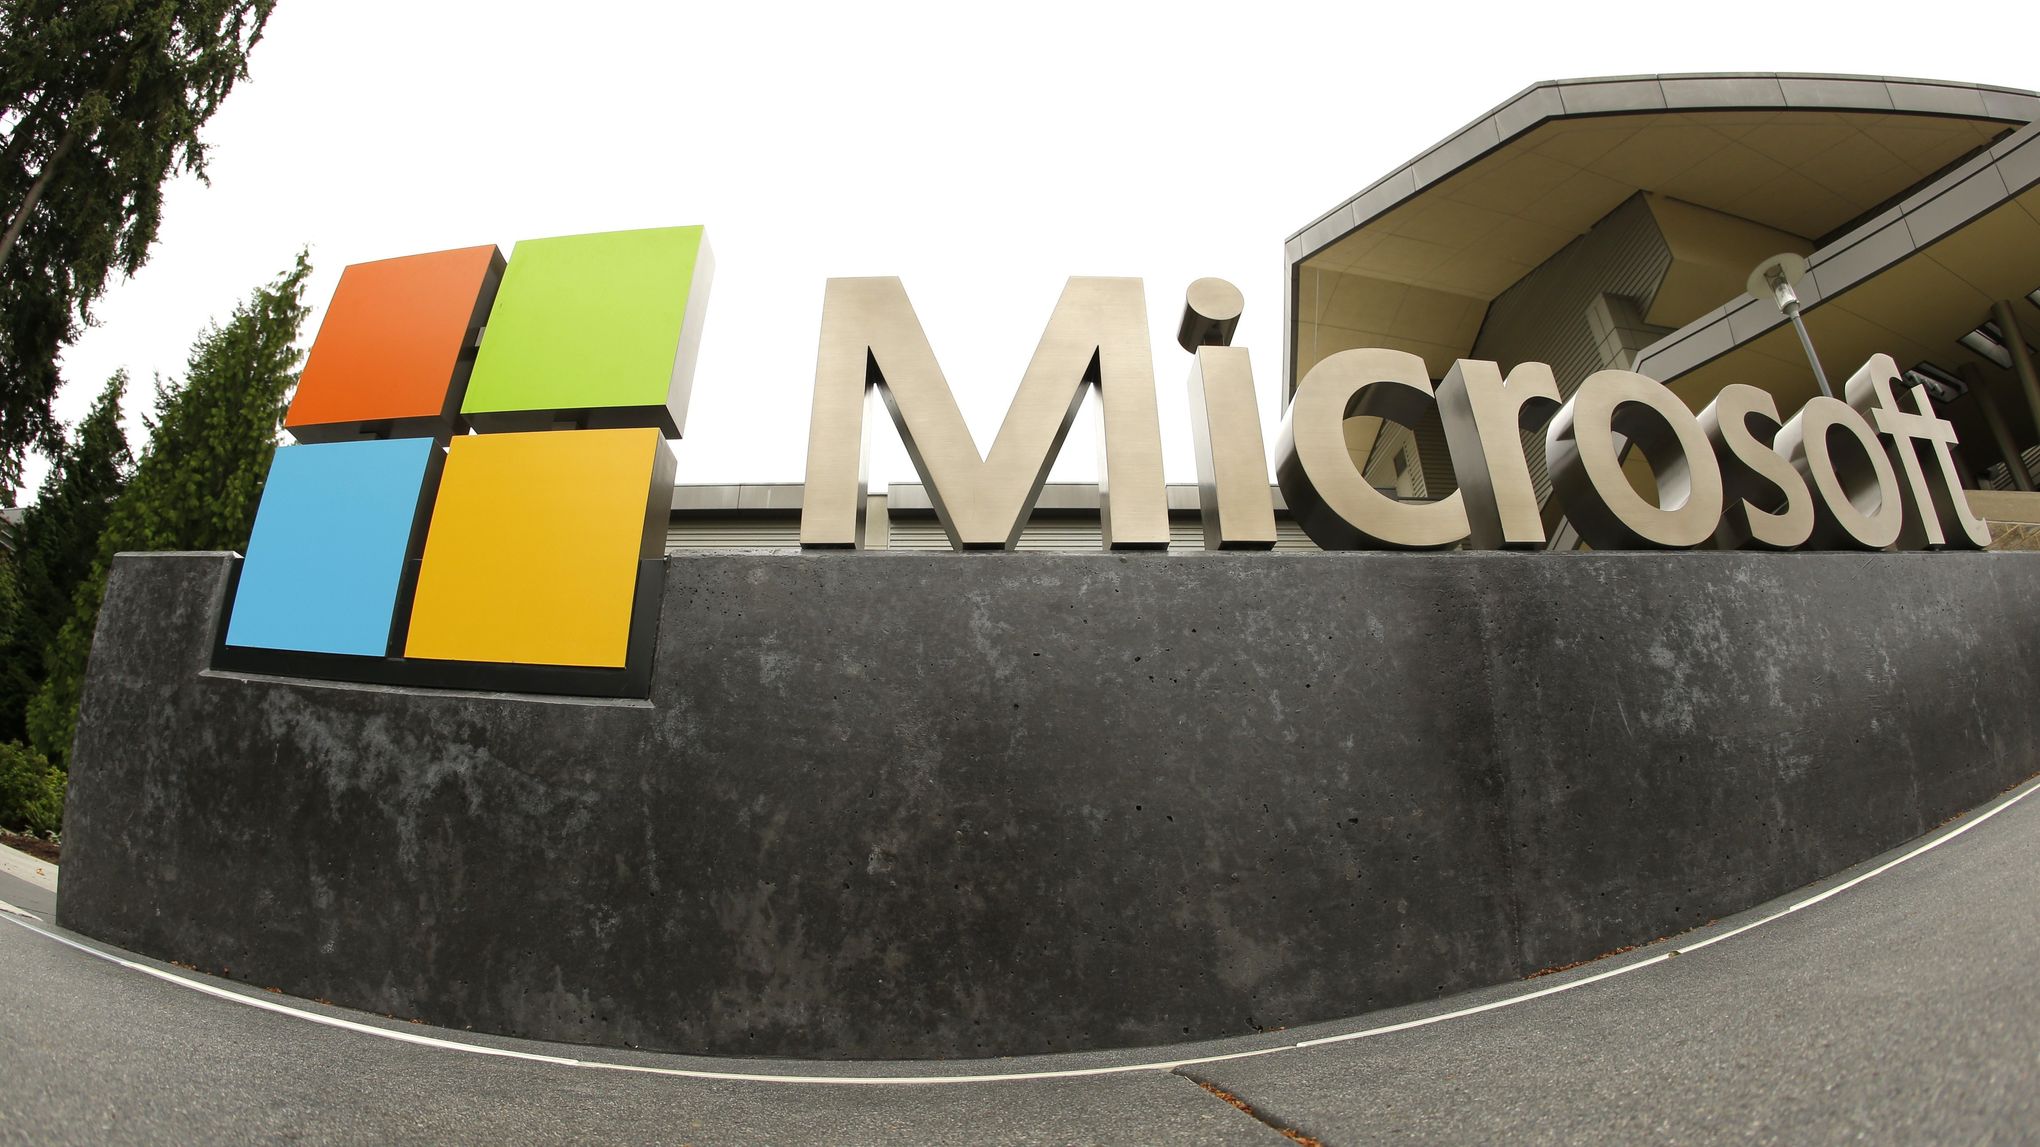 118 gender-bias complaints at Microsoft, but firm found only 1 was ...